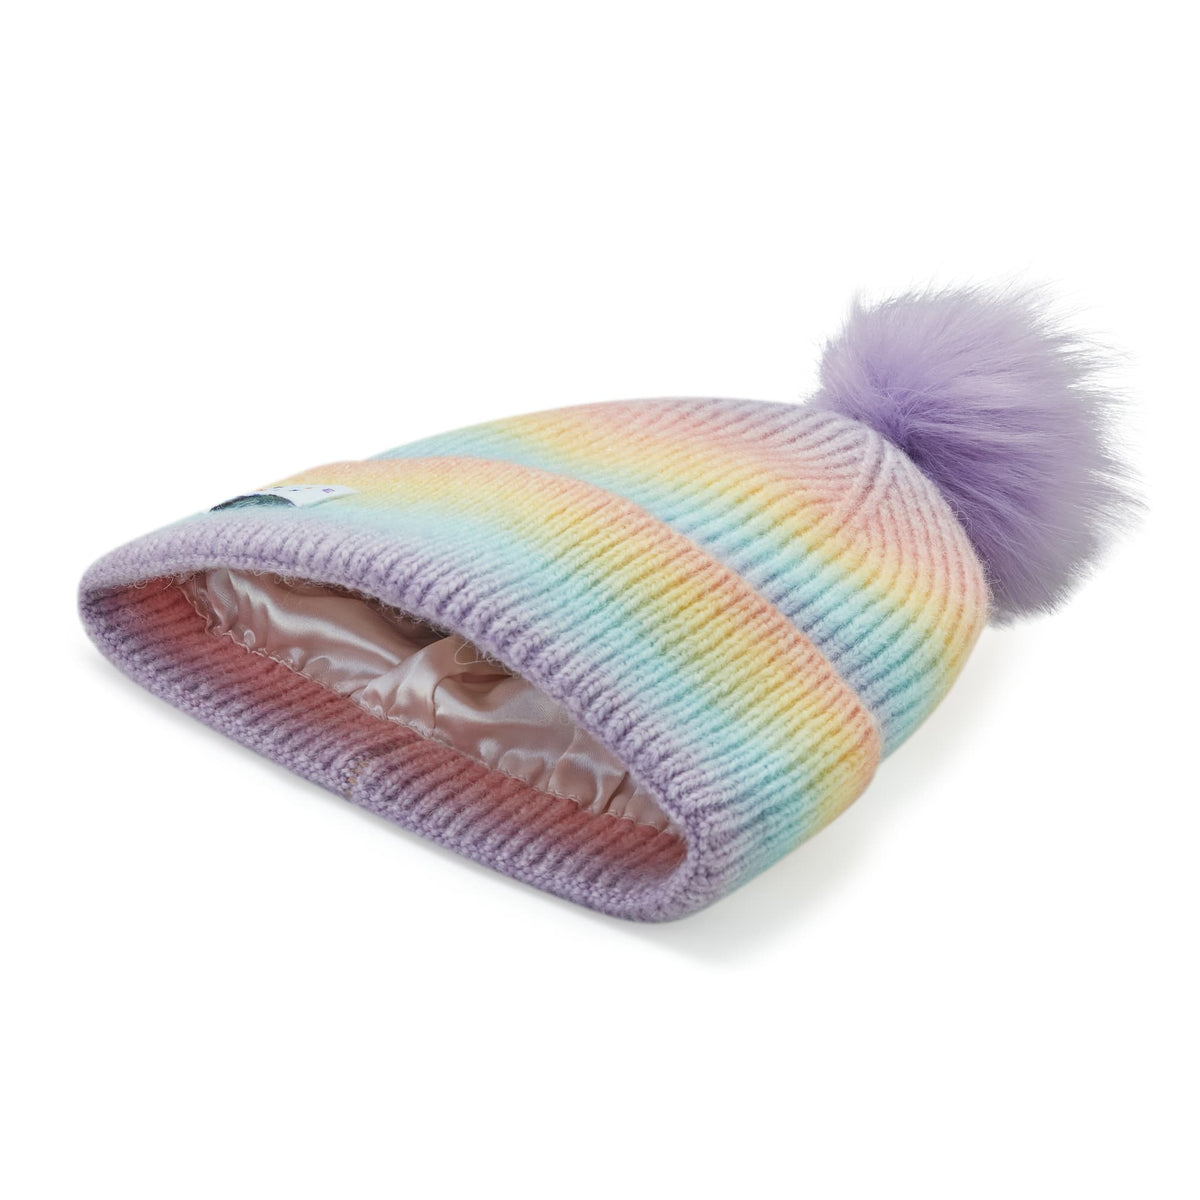 Little Curls Satin Lined Knitted Beanie Hat - Rainbow with Pom Pom - Only Curls